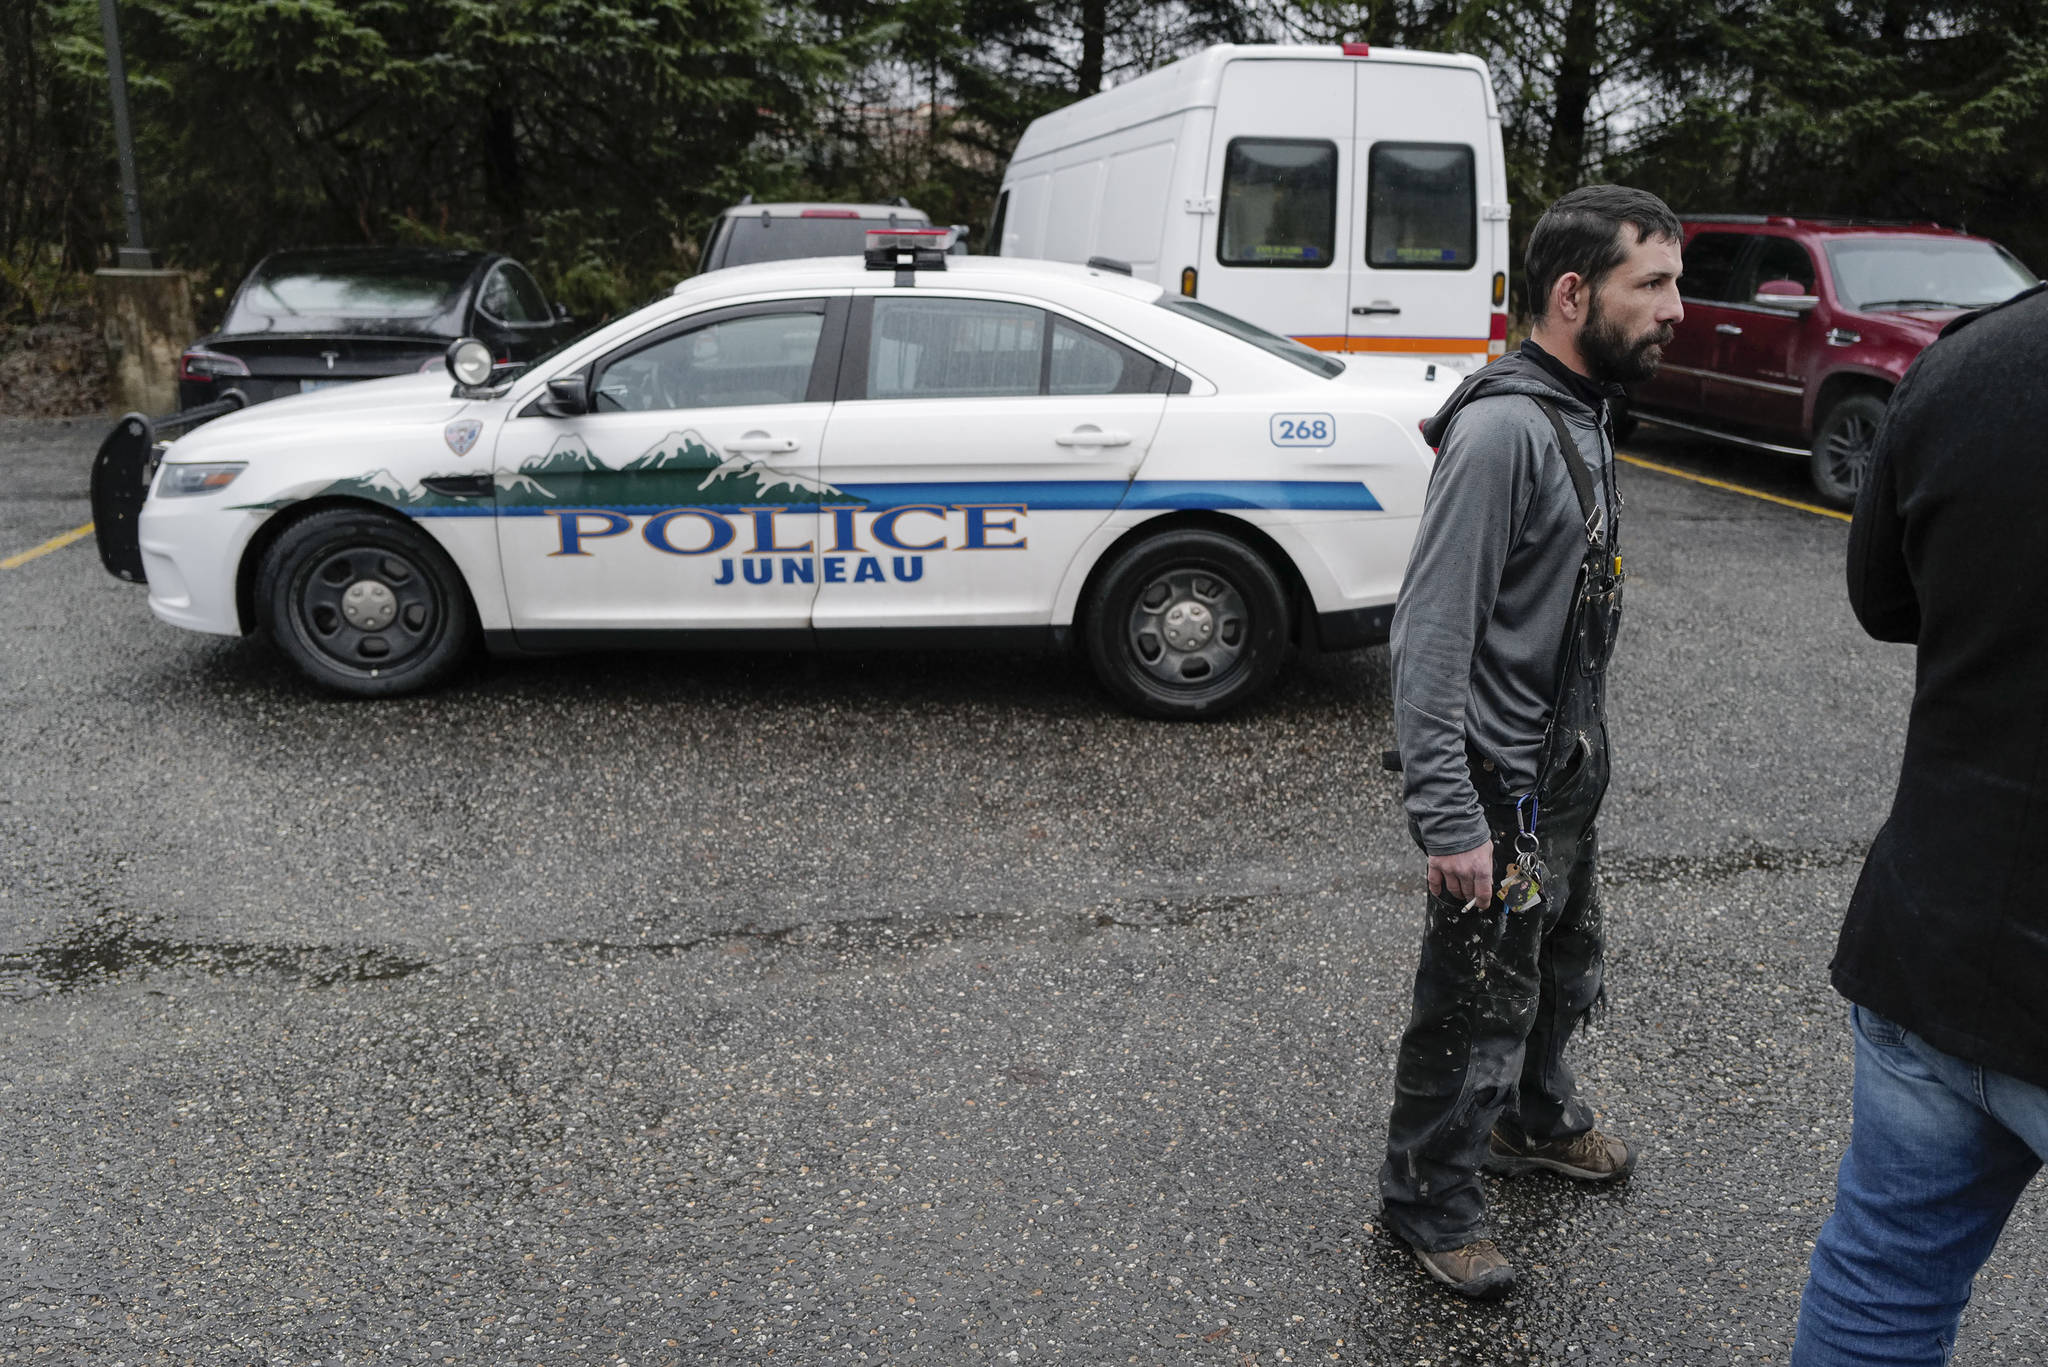 Bill Peters waits near a police cruiser at the Department of Transportation and Public Facilities Buildig on Channel Drive on Wednesday, Dec. 11, 2019. Police found Peters’ stolen vehicle parked in the department’s lot. (Michael Penn | Juneau Empire)